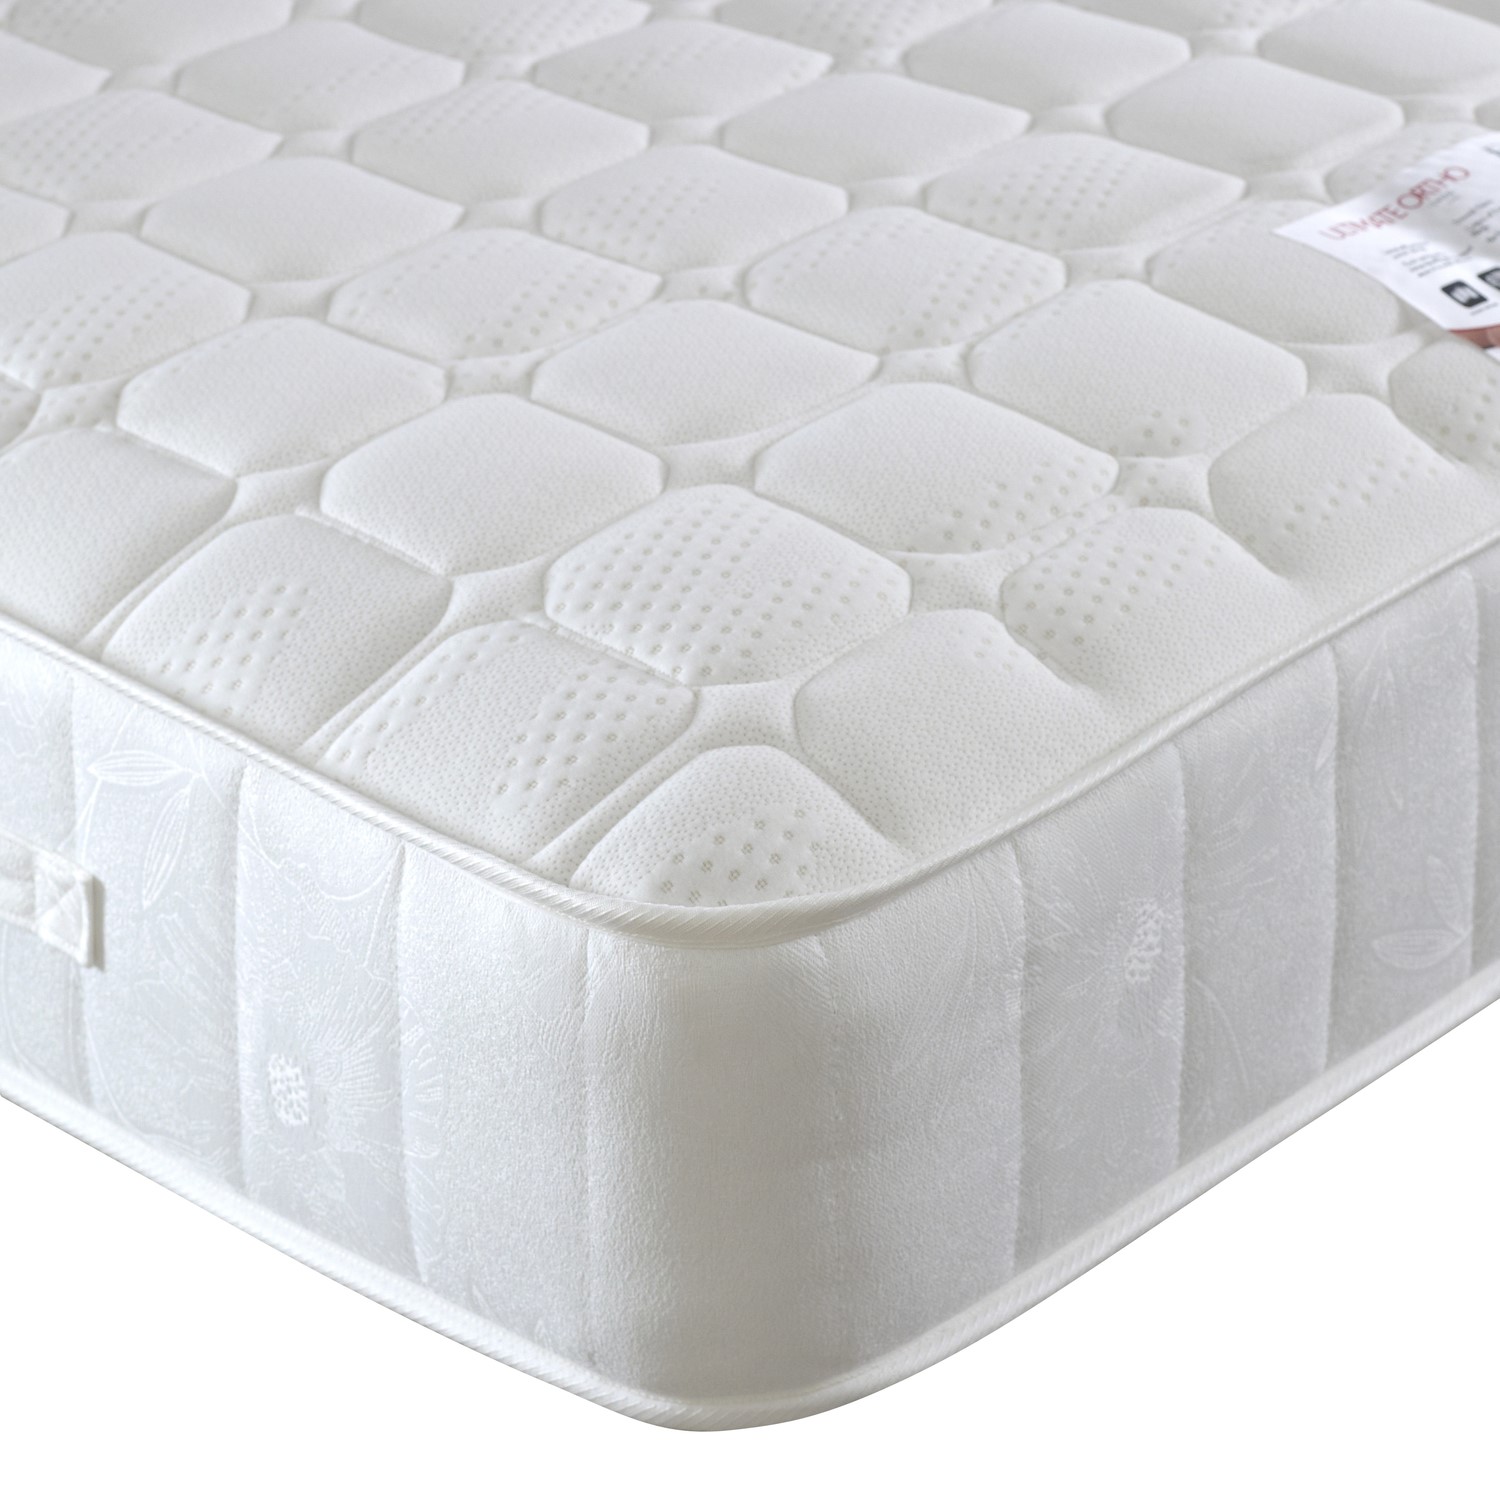 Photo of Small double orthopaedic 1000 pocket sprung quilted mattress - ultimate ortho